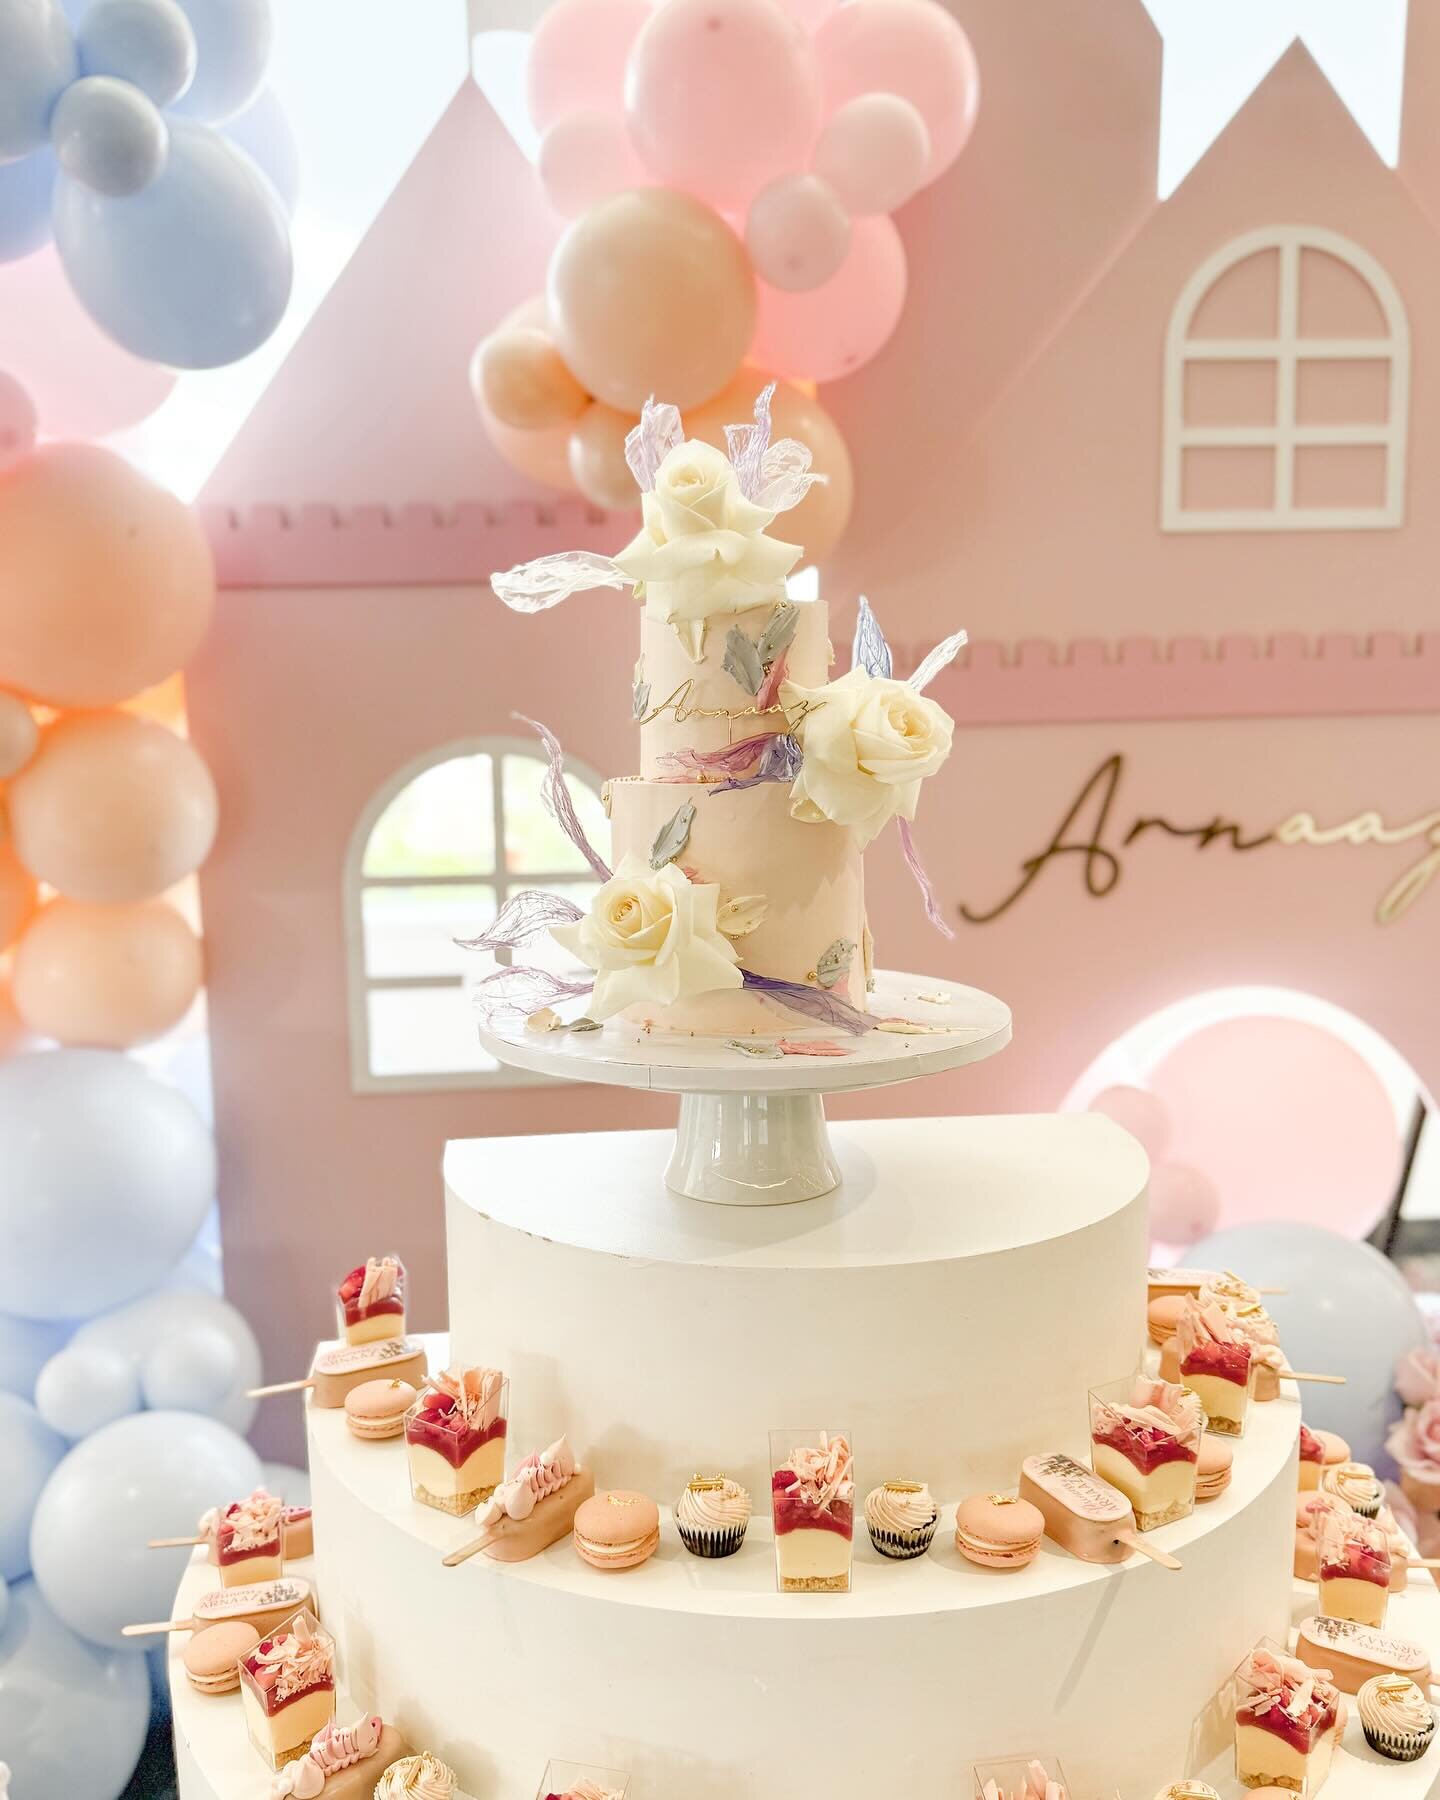 It&rsquo;s all in the details 💕✨

Swipe to see more of our gorgeous princess theme setup for the cutest first birthday party.

Obsessed with the details on our castle . I designed the castle to have the cutest window cutouts and trims - peep those f